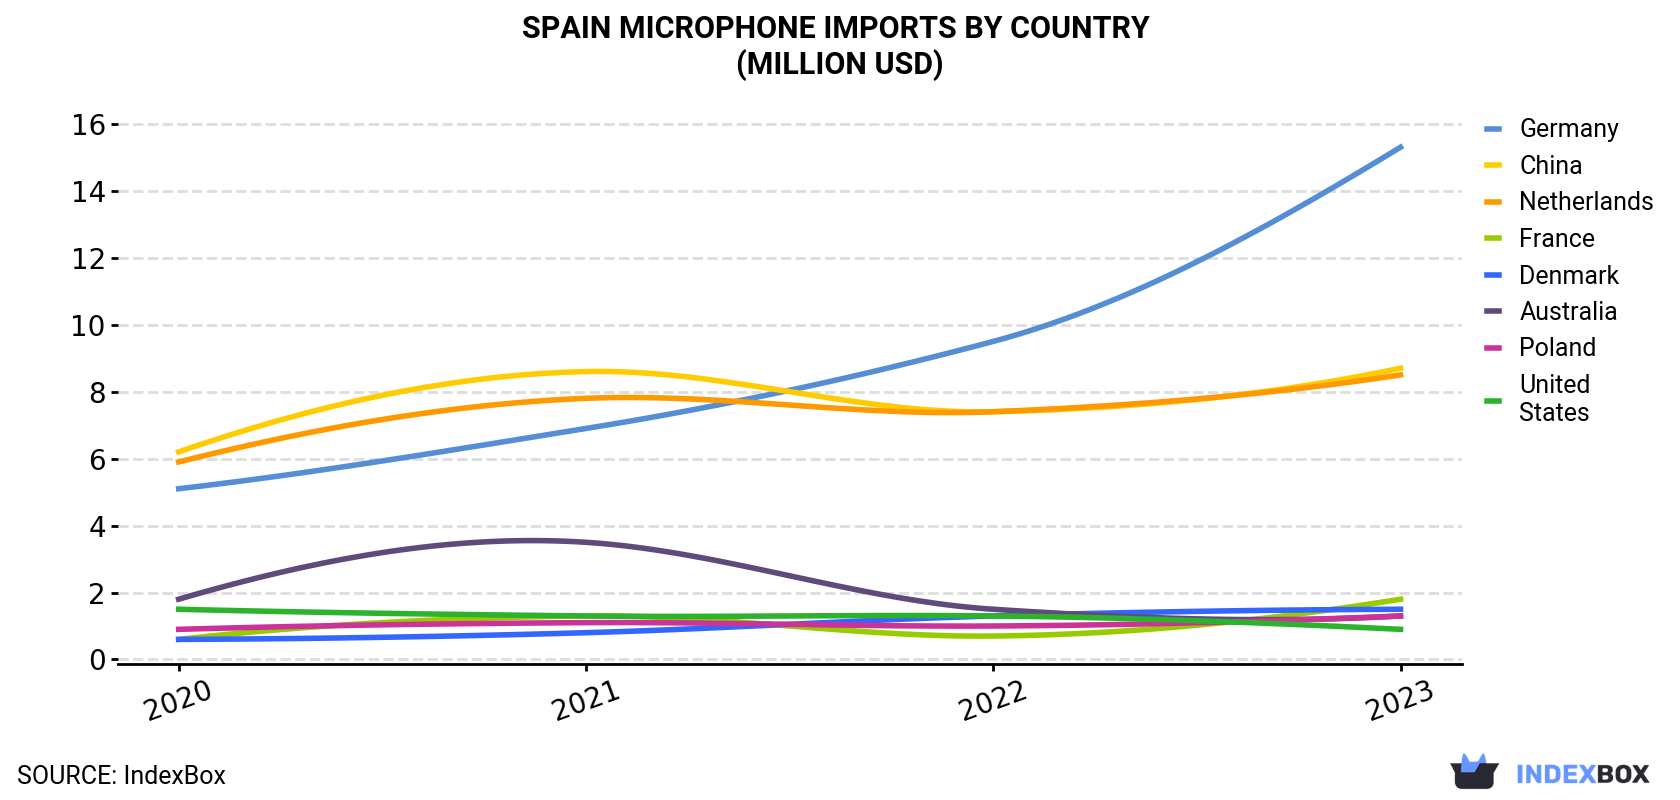 Spain Microphone Imports By Country (Million USD)